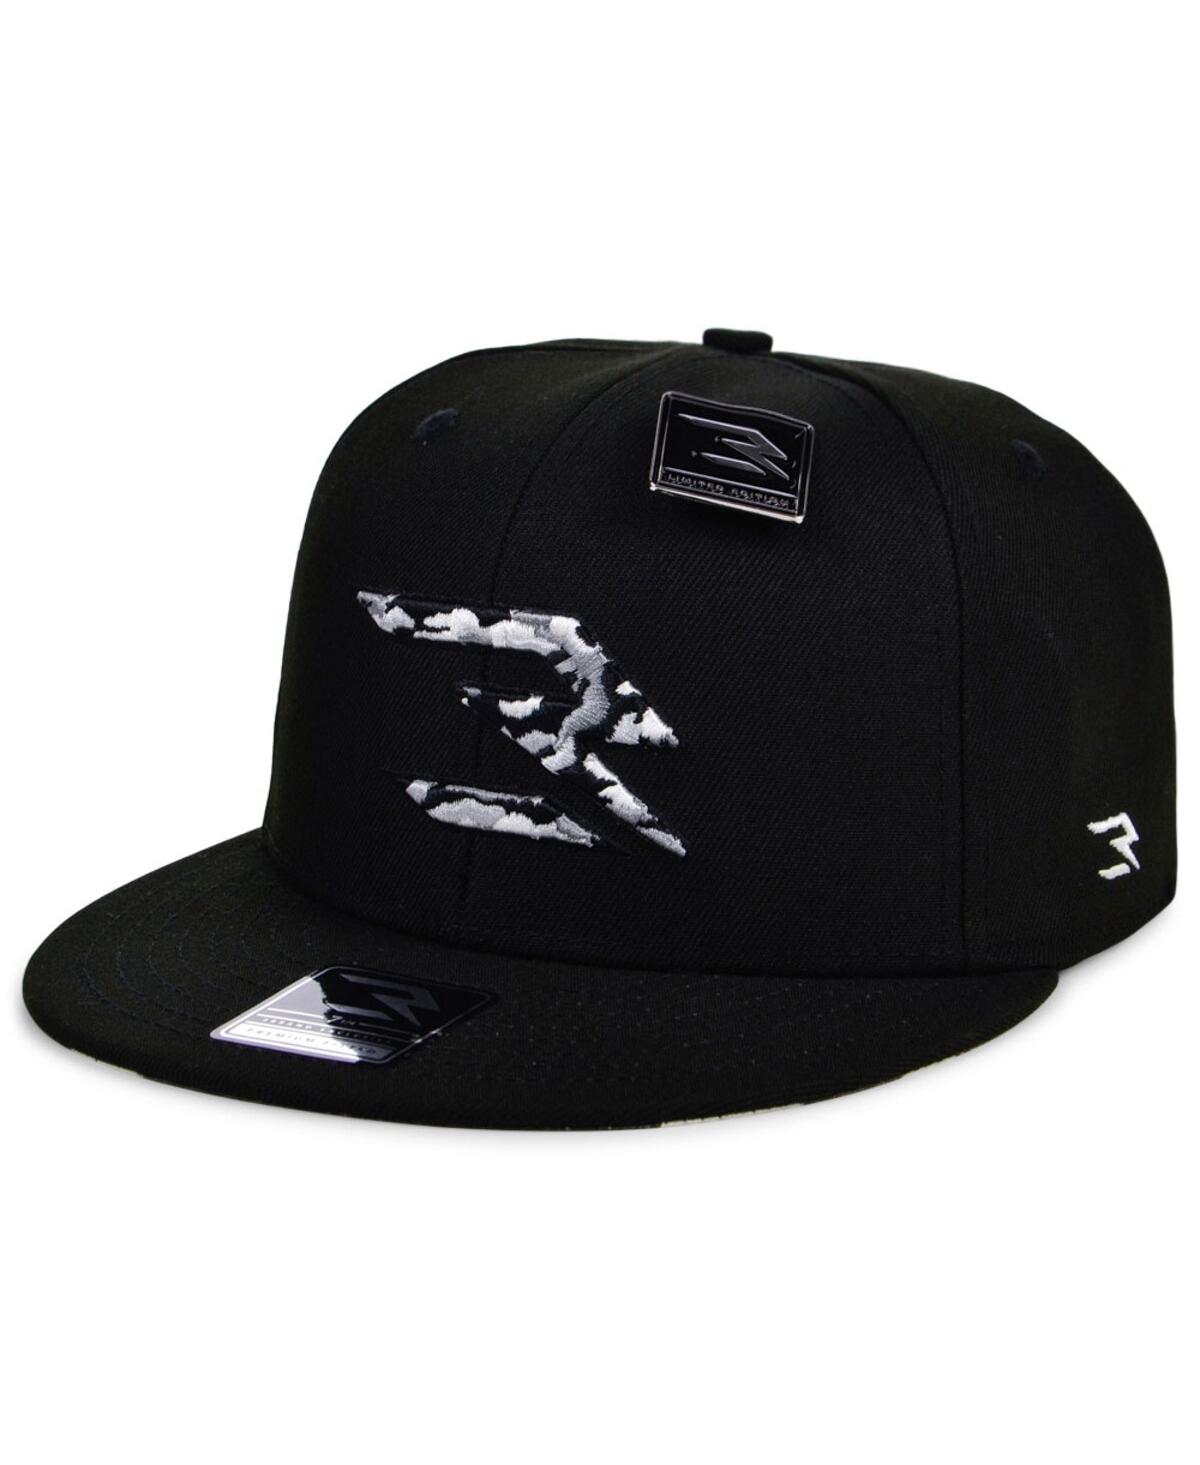 Men's Nike 3BRAND by Russell Wilson Black, Camo Fashion Fitted Hat - Black, Camo